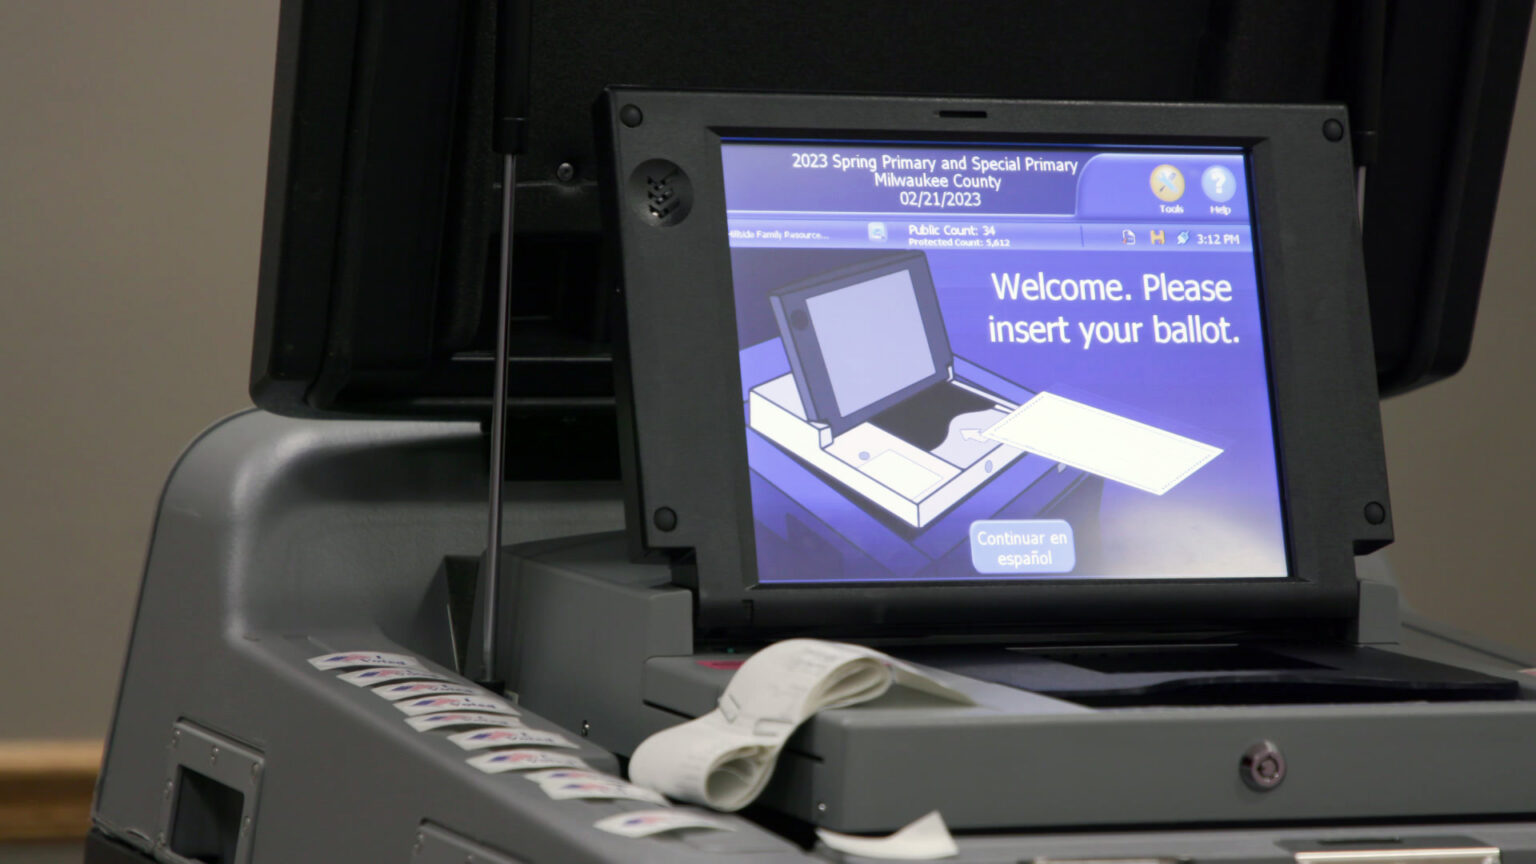 A screen on a ballot tabulator machine shows an illustration that demonstrates how to insert a ballot and includes the words 2023 Spring Primary and Special Primary, Milwaukee County, 02/21/2023, with instructions reading Welcome. Please insert your ballot.